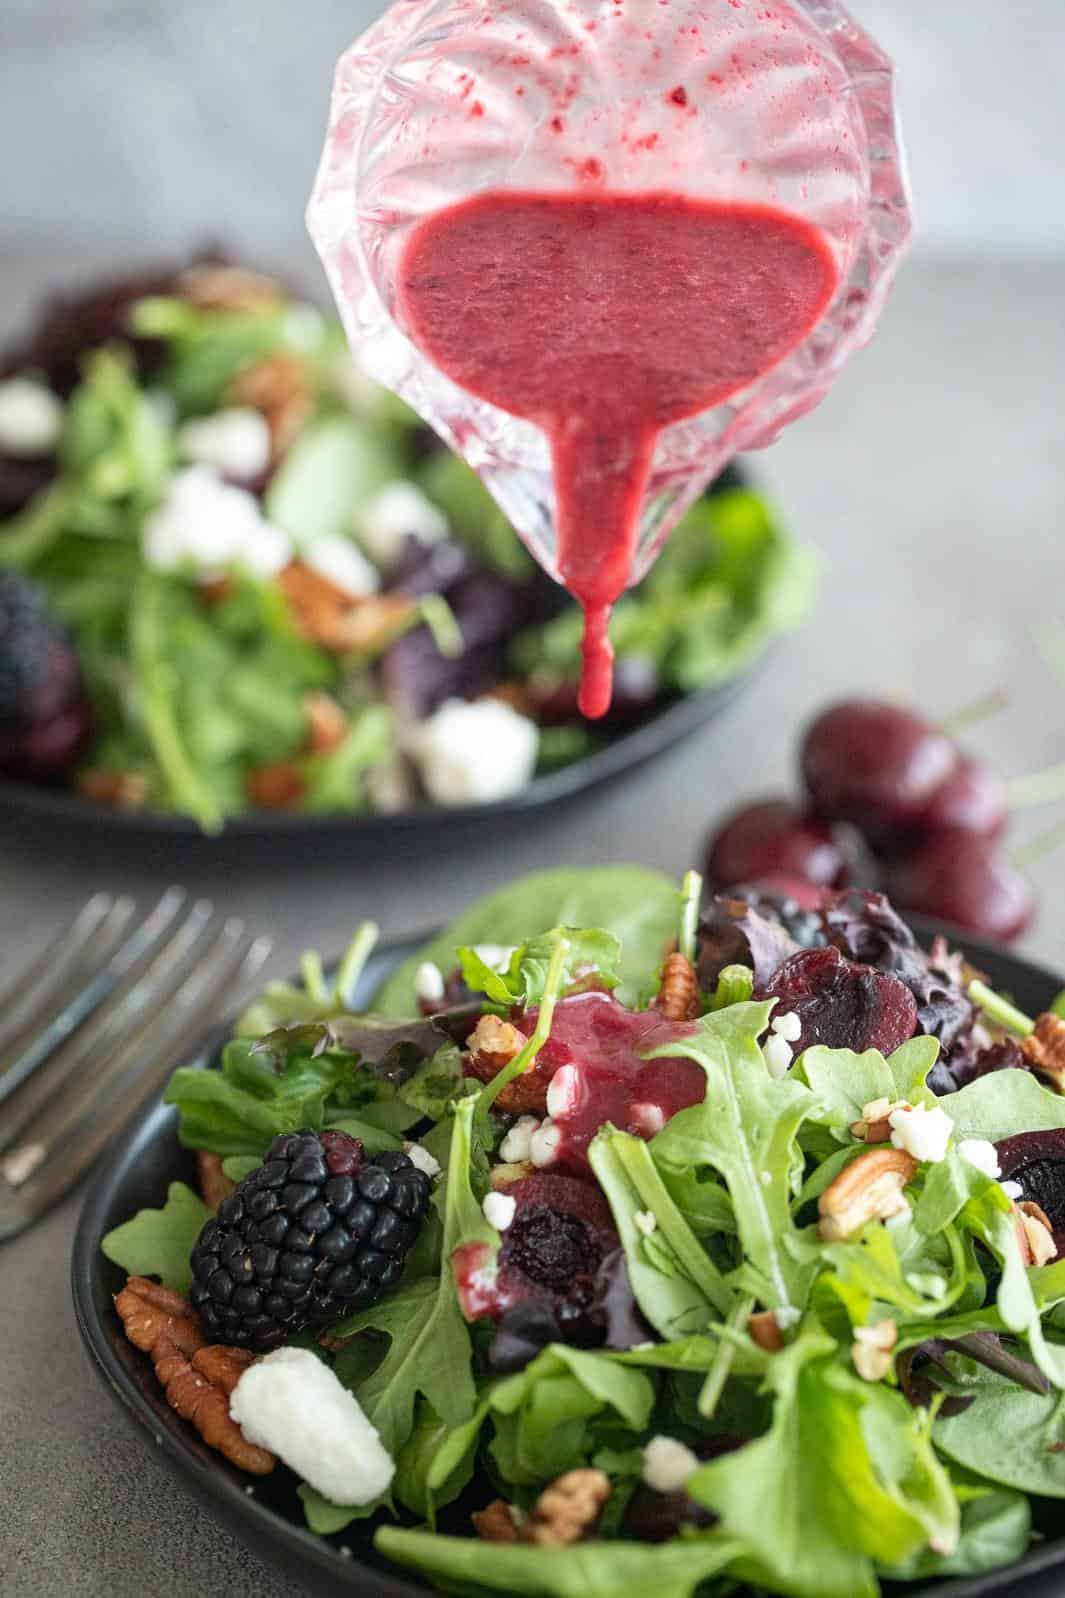  Every leaf of your salad will be kissed by this sweet cherry dressing.